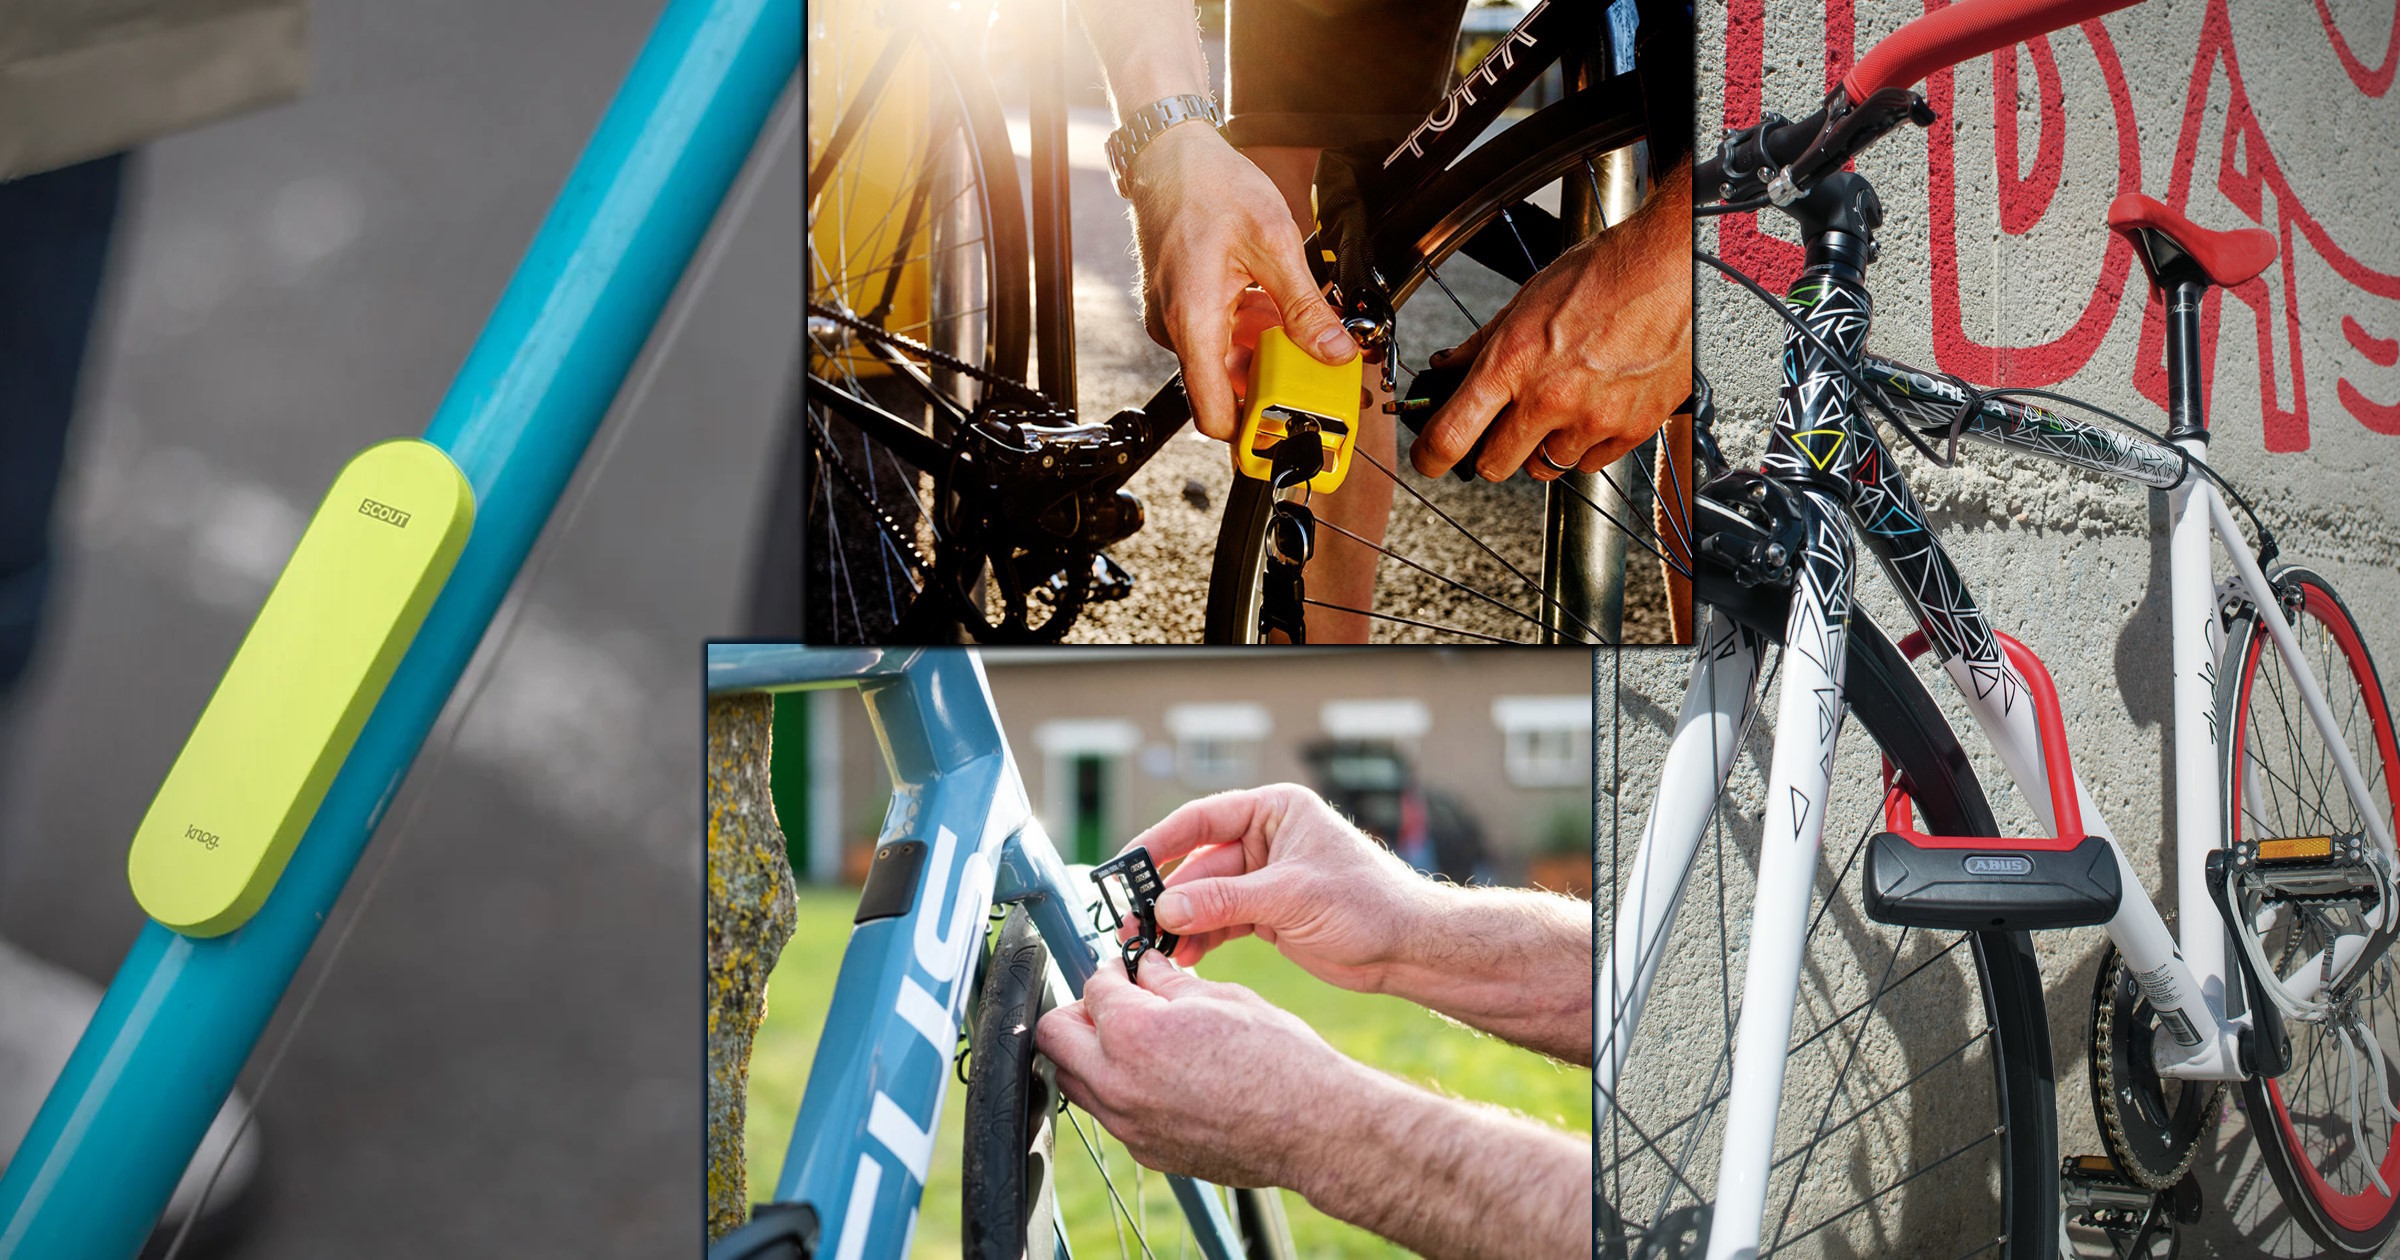 How to keep your bike secure with growing bike theft in Australia